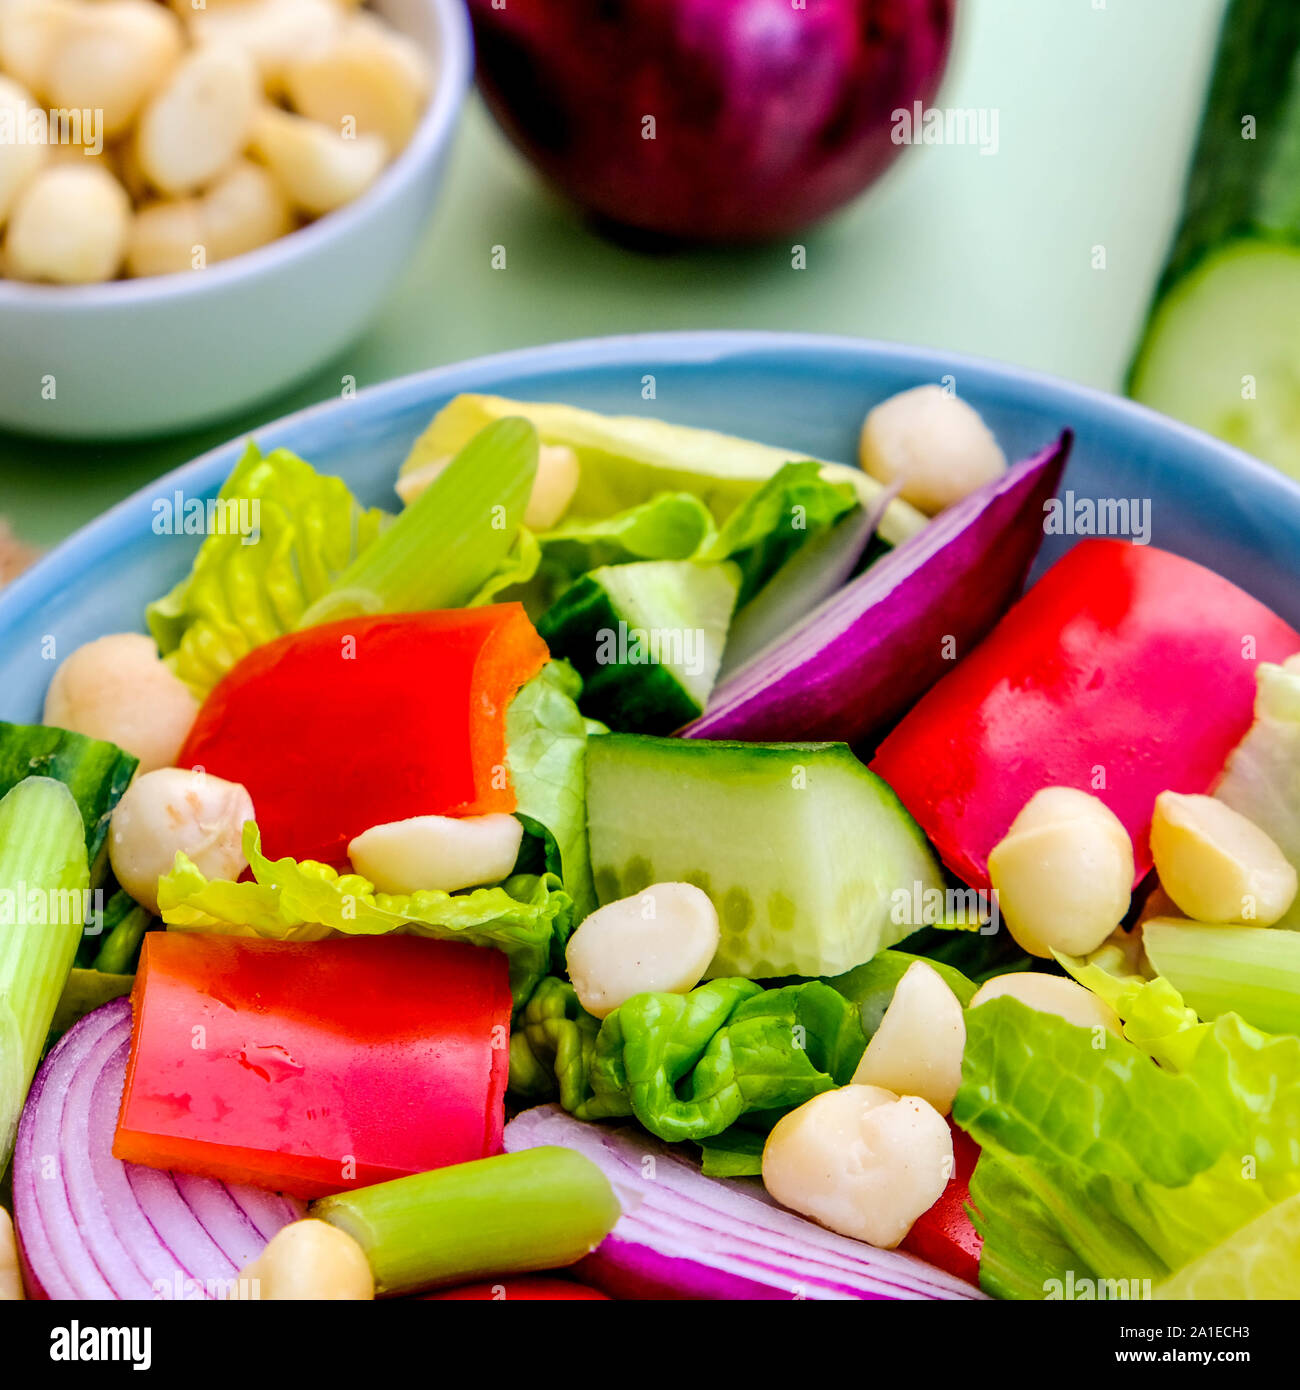 Healthy Vegetarian or Vegan Macadamia Nut Salad With Red Peppers, Chickory, Spring Onions, Gem Lettuce and Red Onion Stock Photo